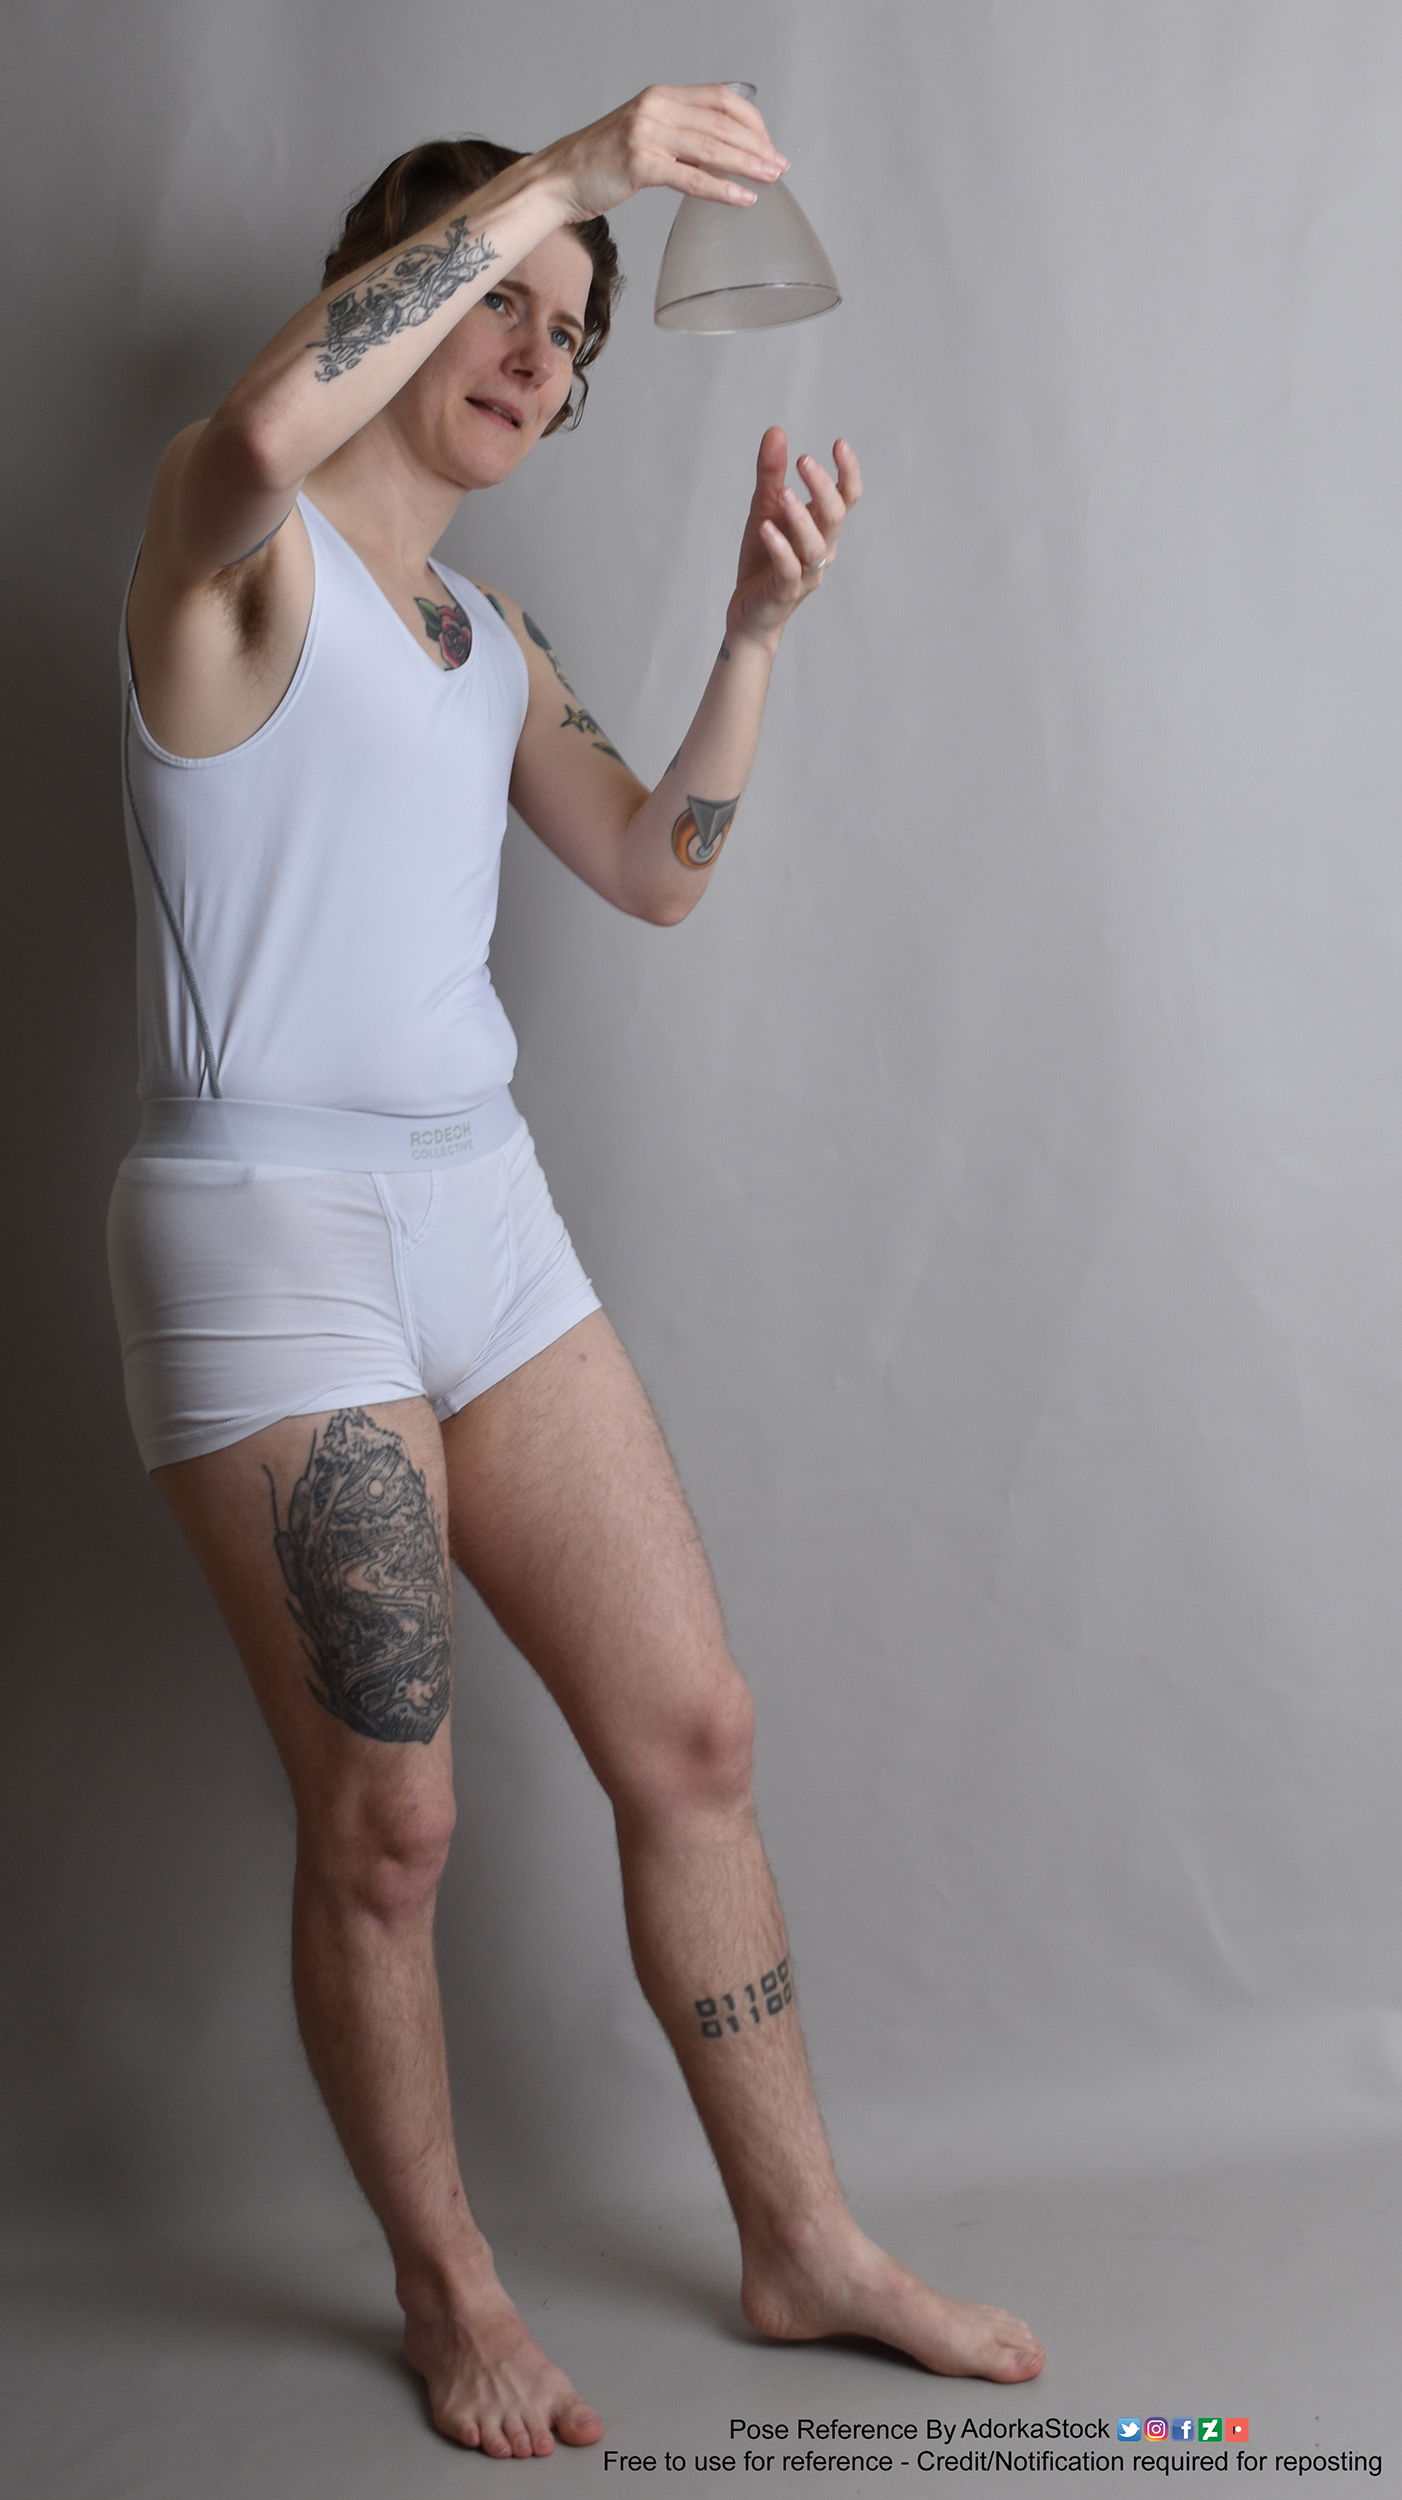 Thin, white, nonbinary pose reference model in standing pose with a science beaker held up in one hand the other slightly under it.